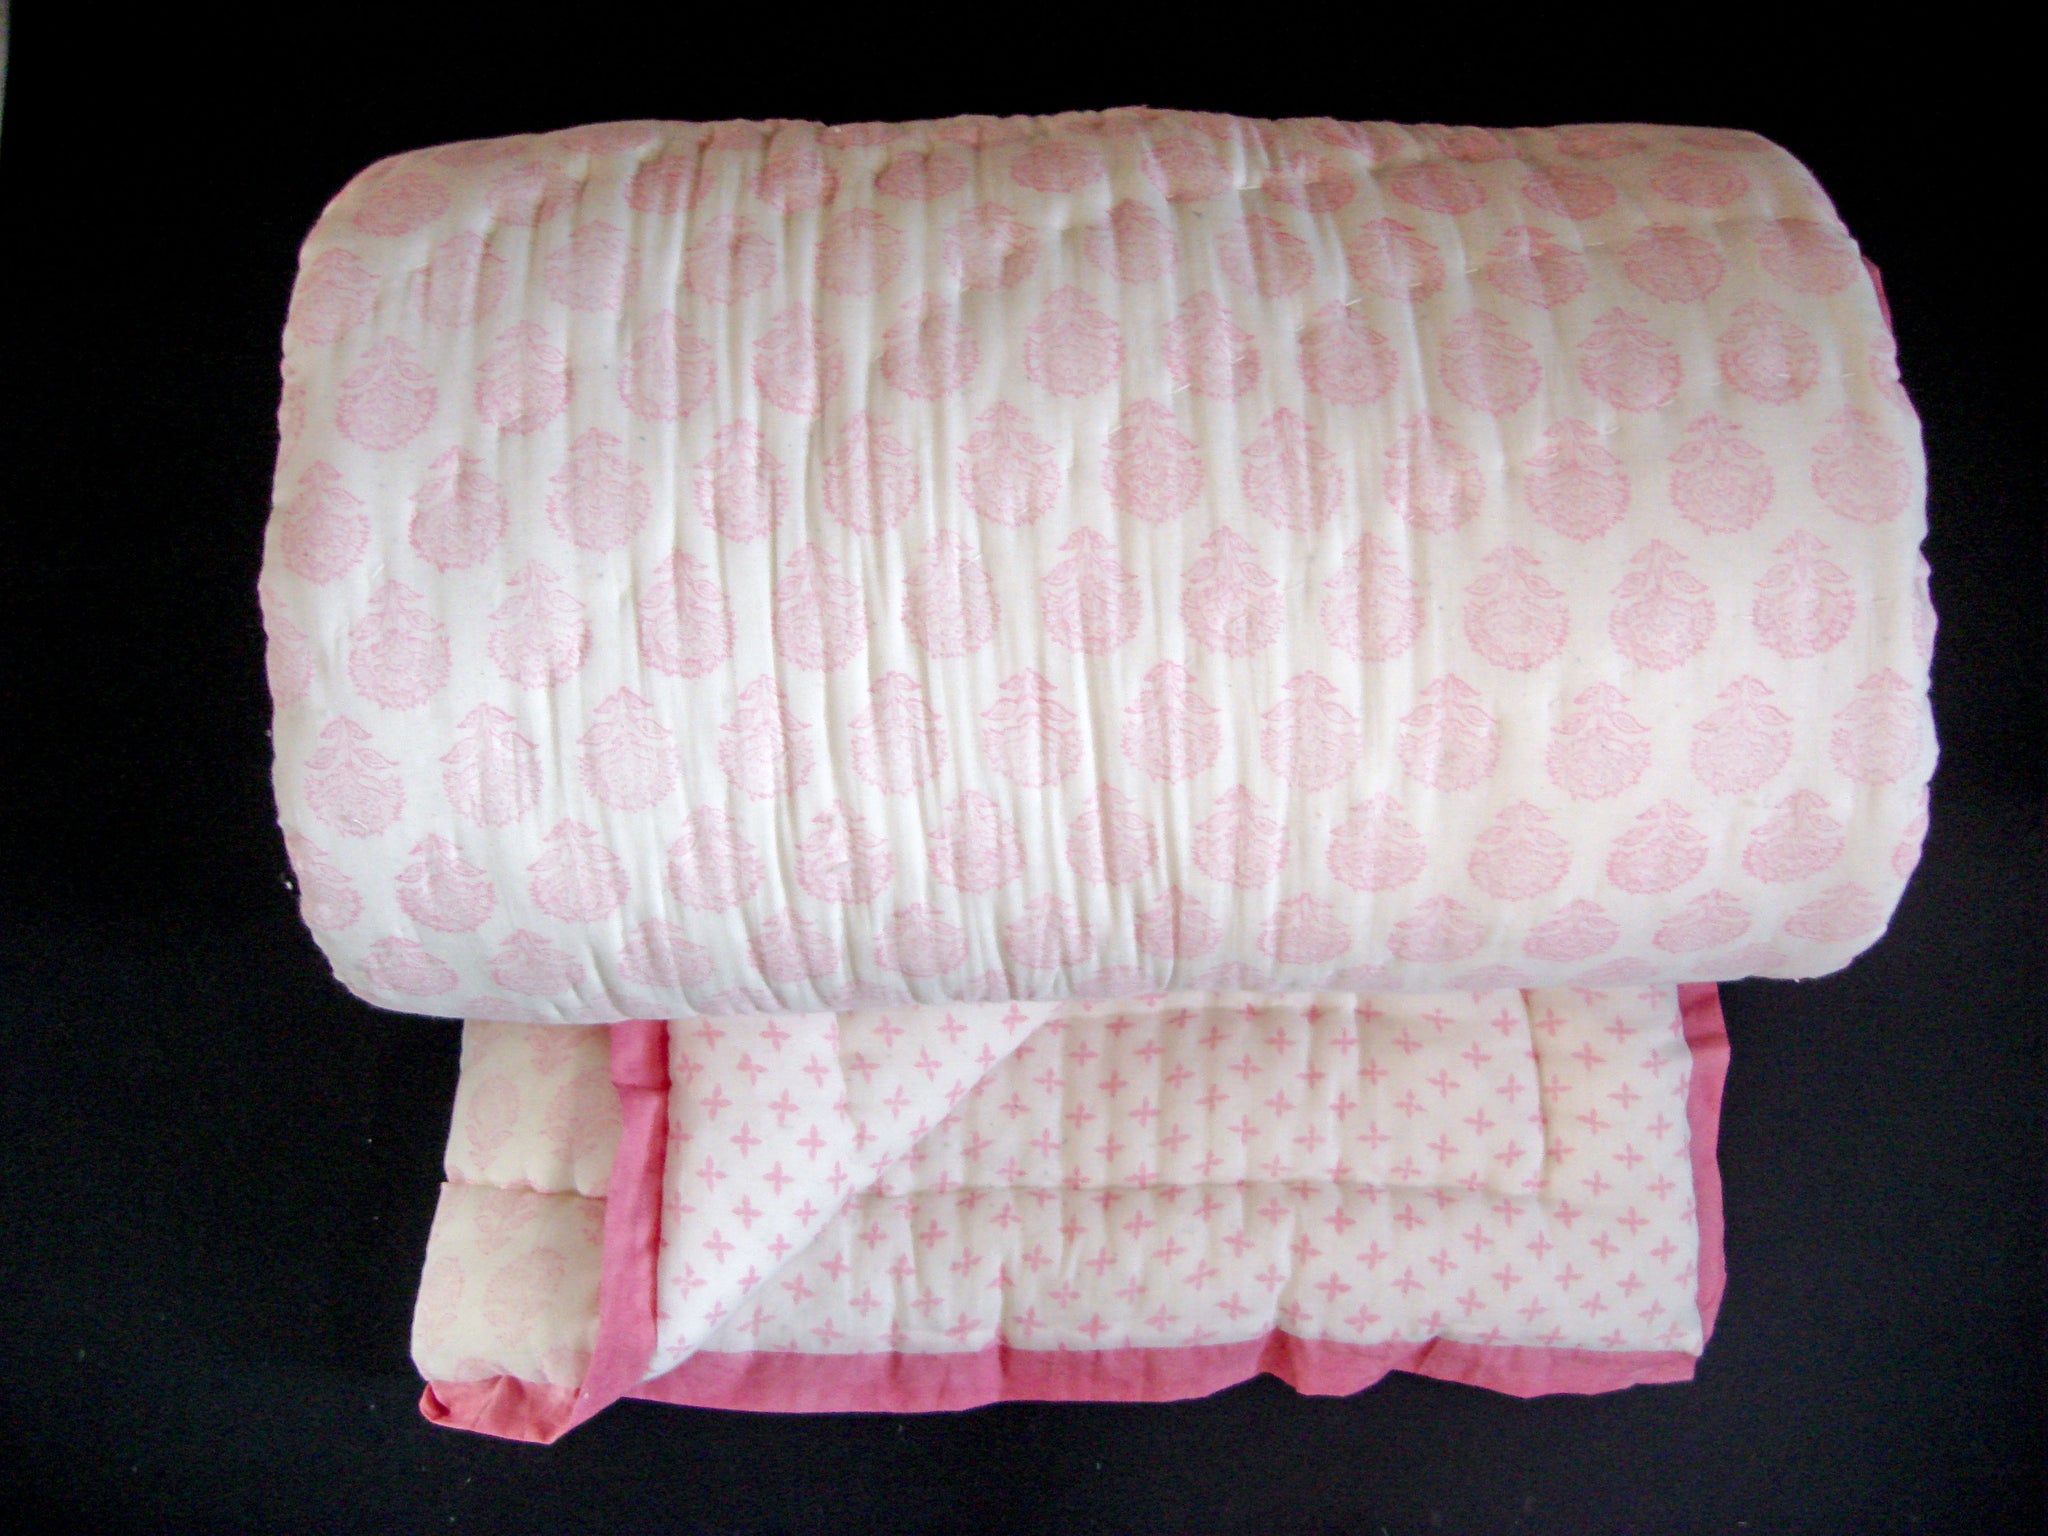 All New Roysha Handmade Cotton Queen Quilt in Pink Floral Pattern